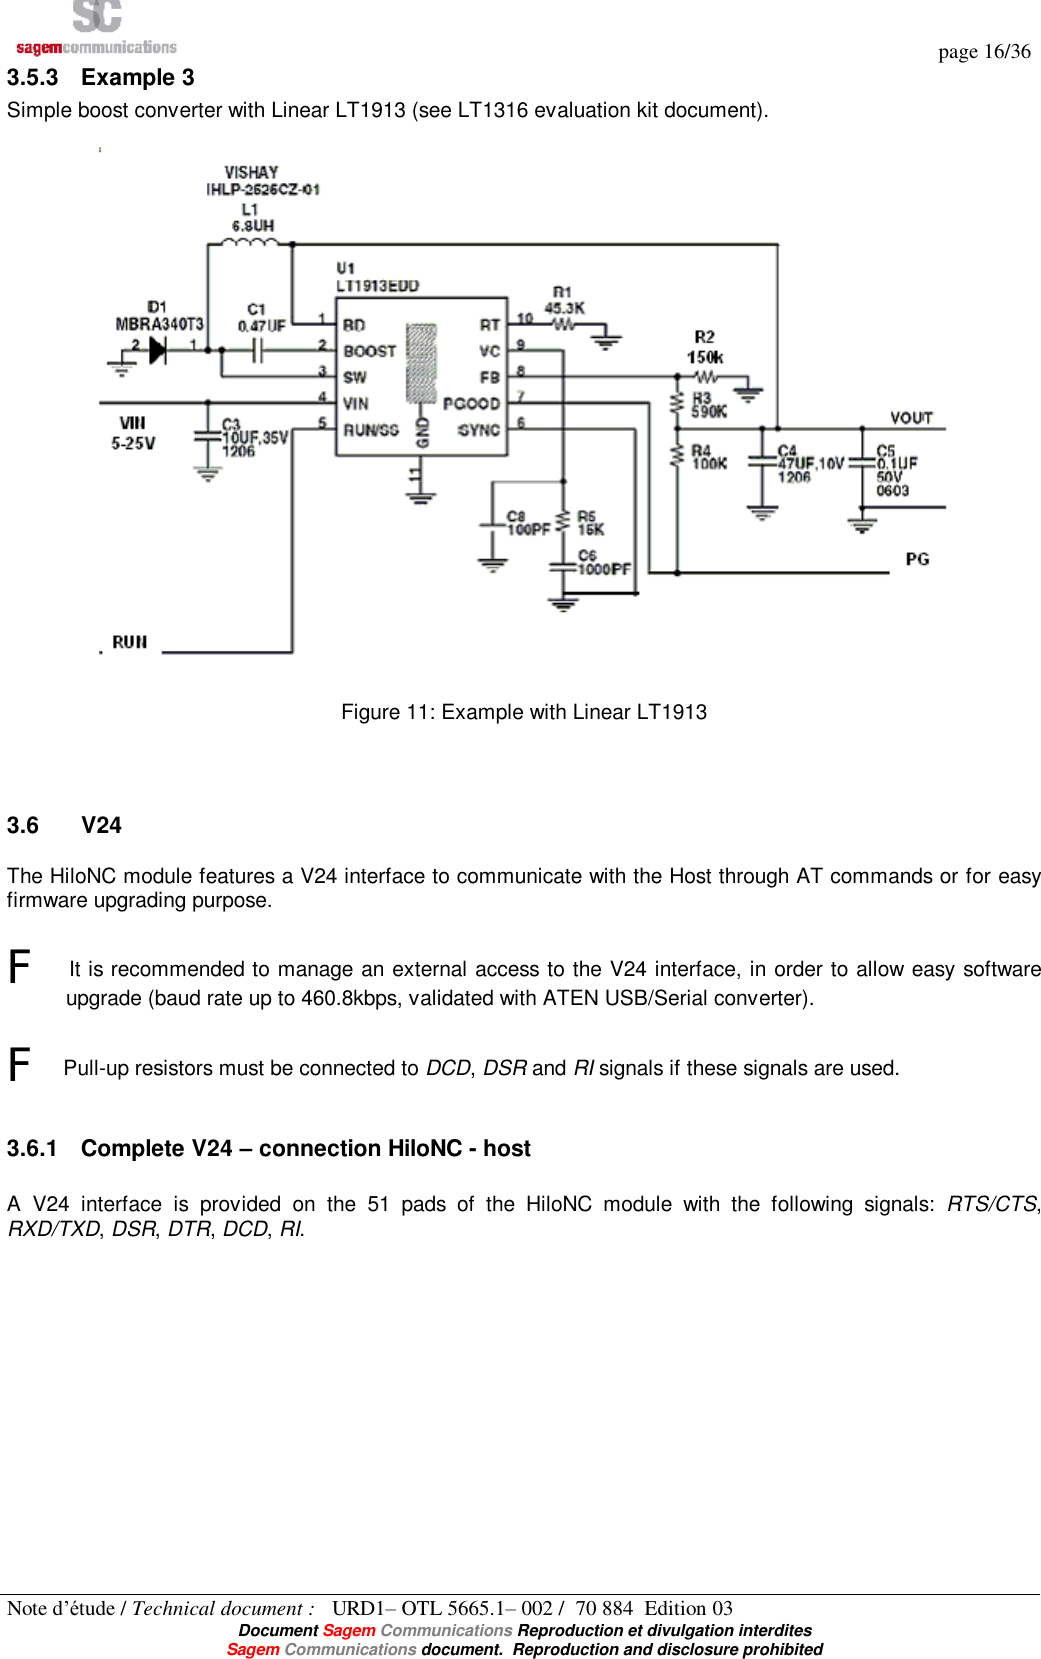   page 16/36 Note d’étude / Technical document :   URD1– OTL 5665.1– 002 /  70 884  Edition 03  Document Sagem Communications Reproduction et divulgation interdites Sagem Communications document.  Reproduction and disclosure prohibited 3.5.3 Example 3 Simple boost converter with Linear LT1913 (see LT1316 evaluation kit document).    Figure 11: Example with Linear LT1913   3.6  V24 The HiloNC module features a V24 interface to communicate with the Host through AT commands or for easy firmware upgrading purpose.  F It is recommended to manage an external access to the V24 interface, in order to allow easy software upgrade (baud rate up to 460.8kbps, validated with ATEN USB/Serial converter).  F Pull-up resistors must be connected to DCD, DSR and RI signals if these signals are used.  3.6.1 Complete V24 – connection HiloNC - host  A V24 interface is provided on the 51 pads of the HiloNC module with the following signals:  RTS/CTS, RXD/TXD, DSR, DTR, DCD, RI. 